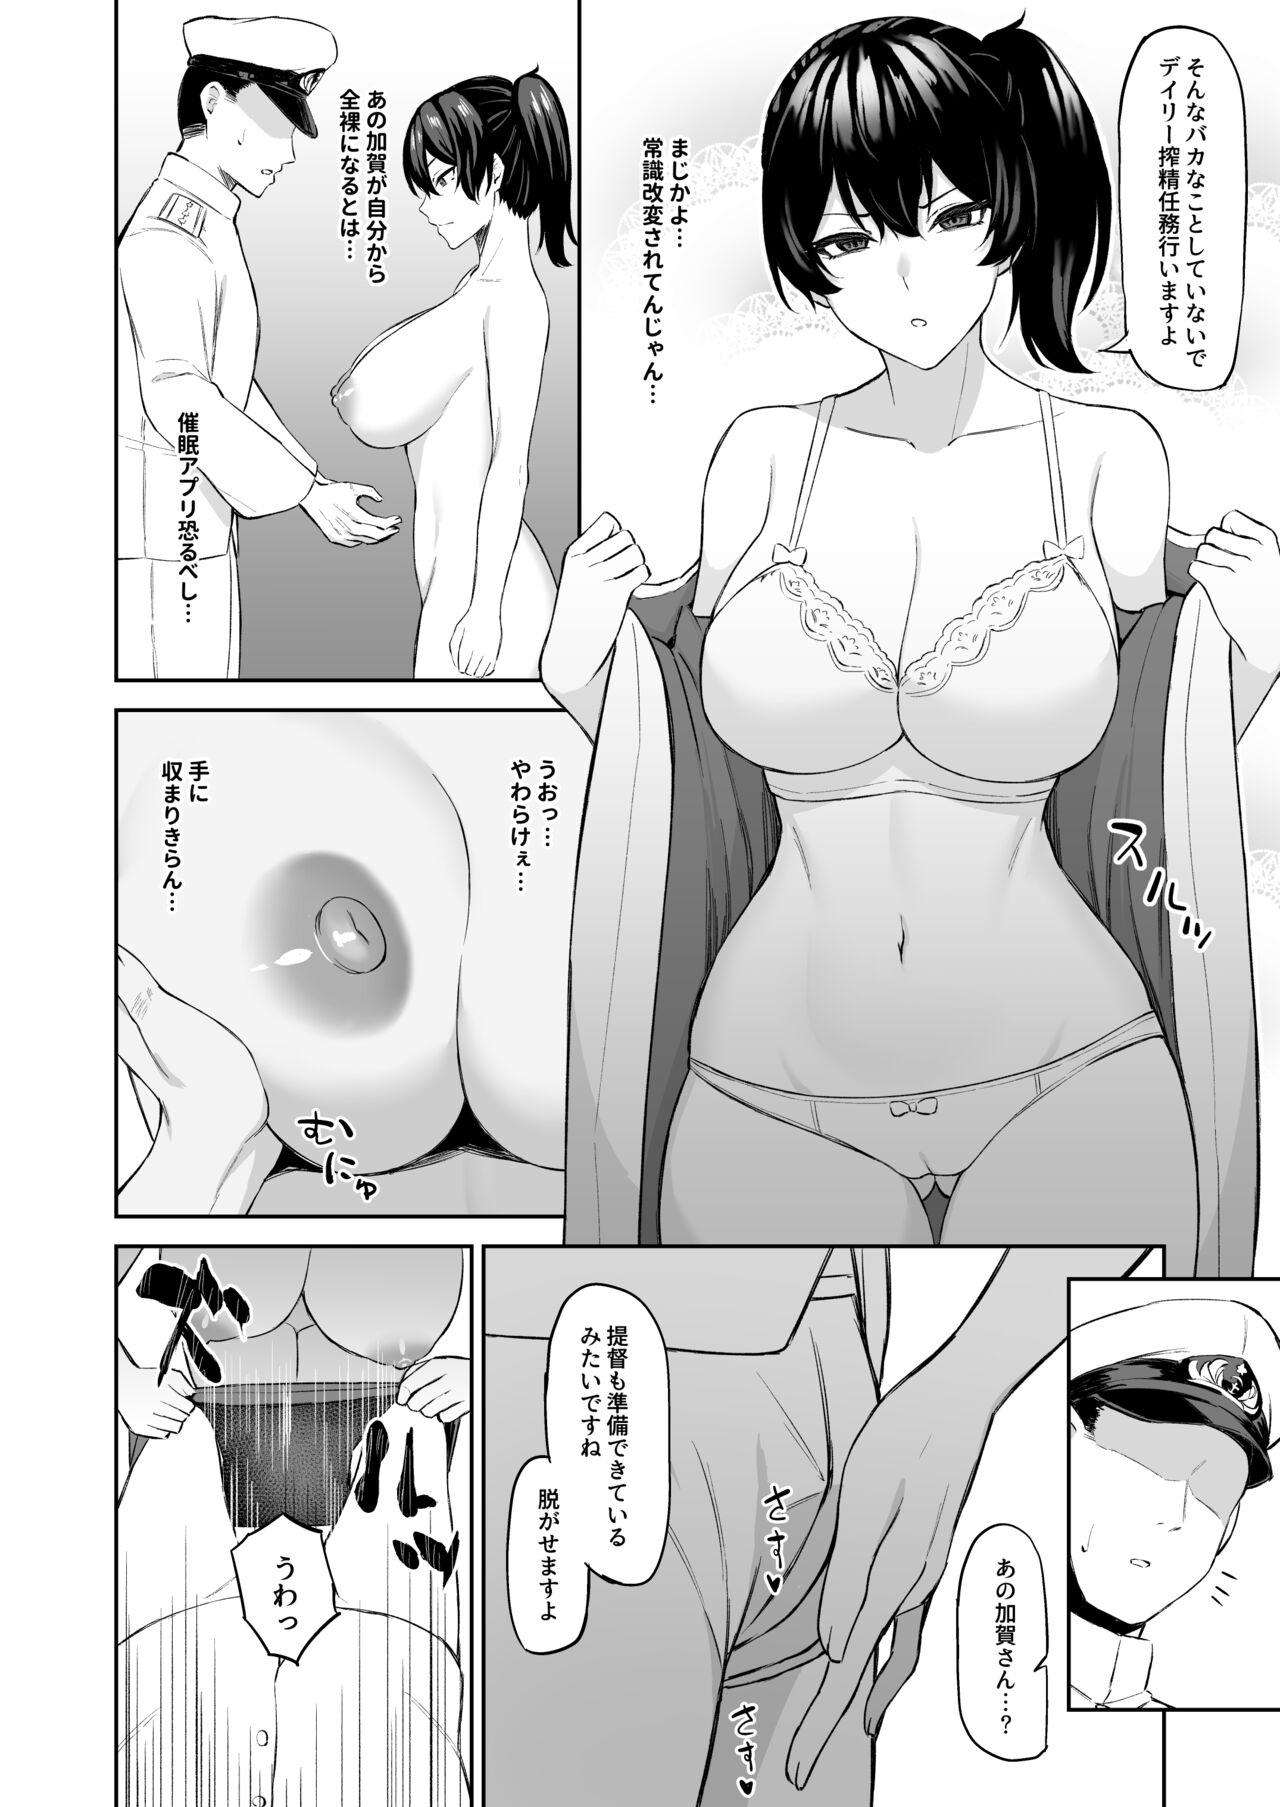 Massages 催眠加賀さん - Kantai collection Hiddencam - Page 3